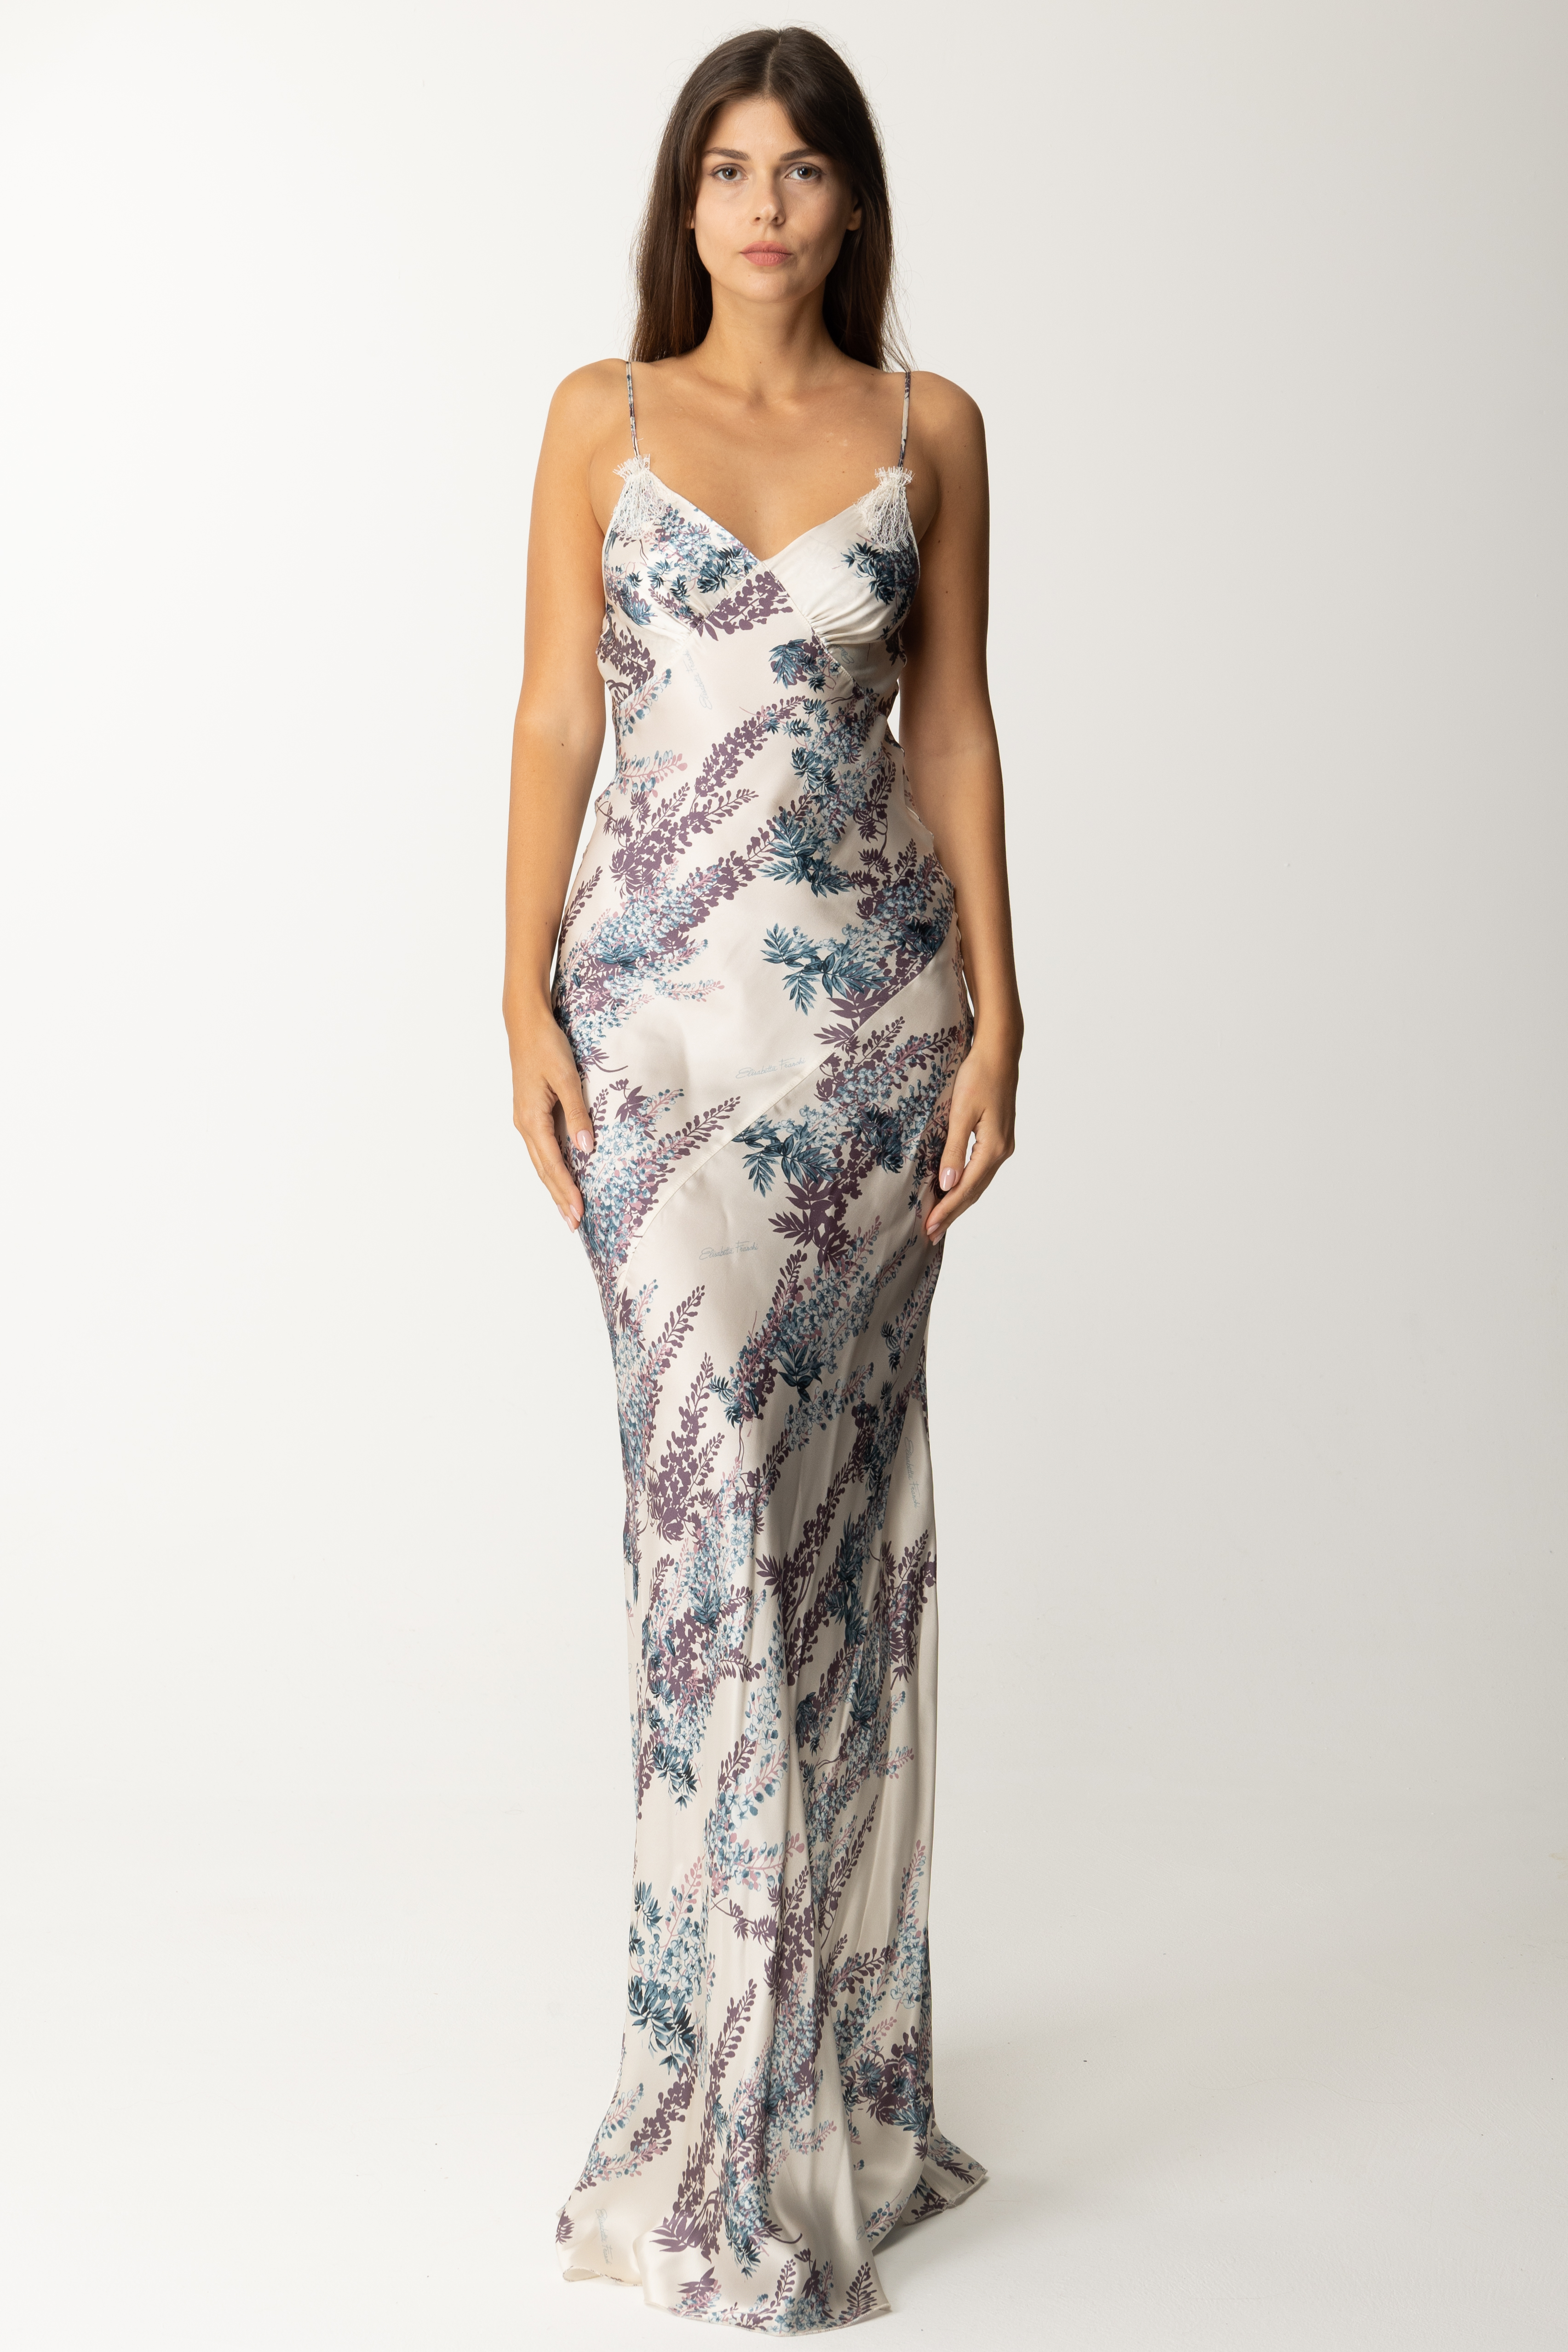 Preview: Elisabetta Franchi Dress in silk with floral print Burro